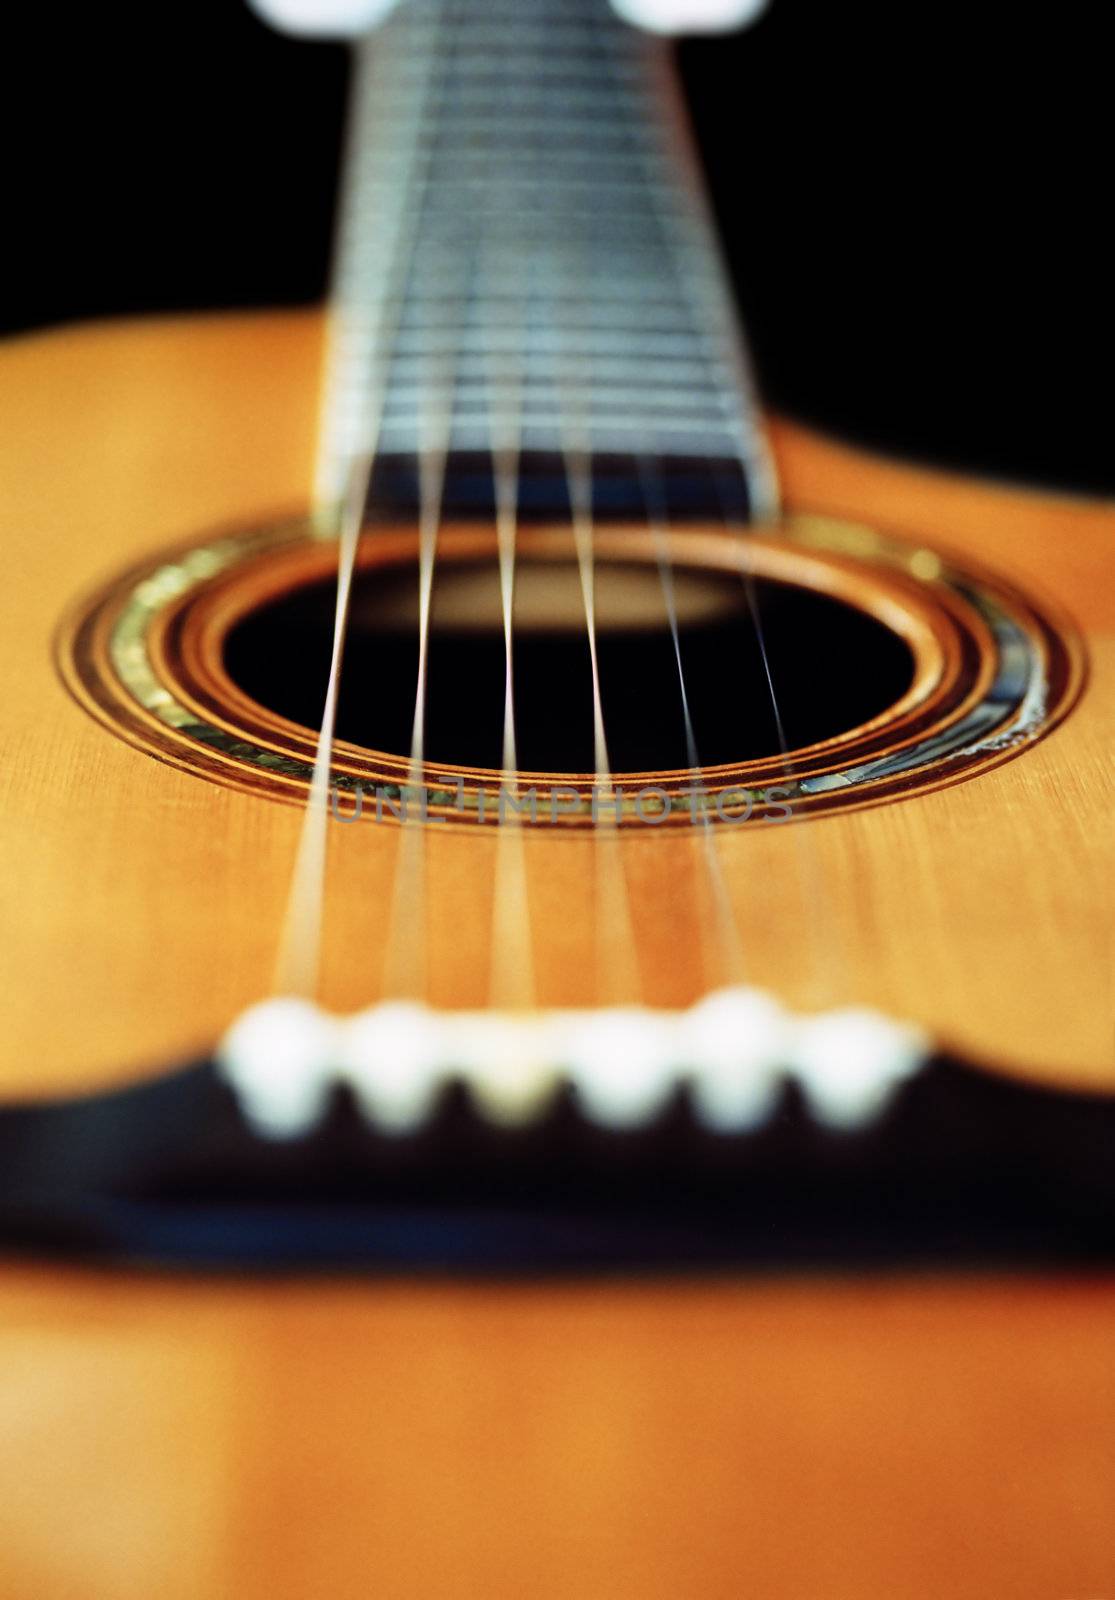 A very short depth-of-field image of an acoustic guitar from the bridge looking up the neck.
